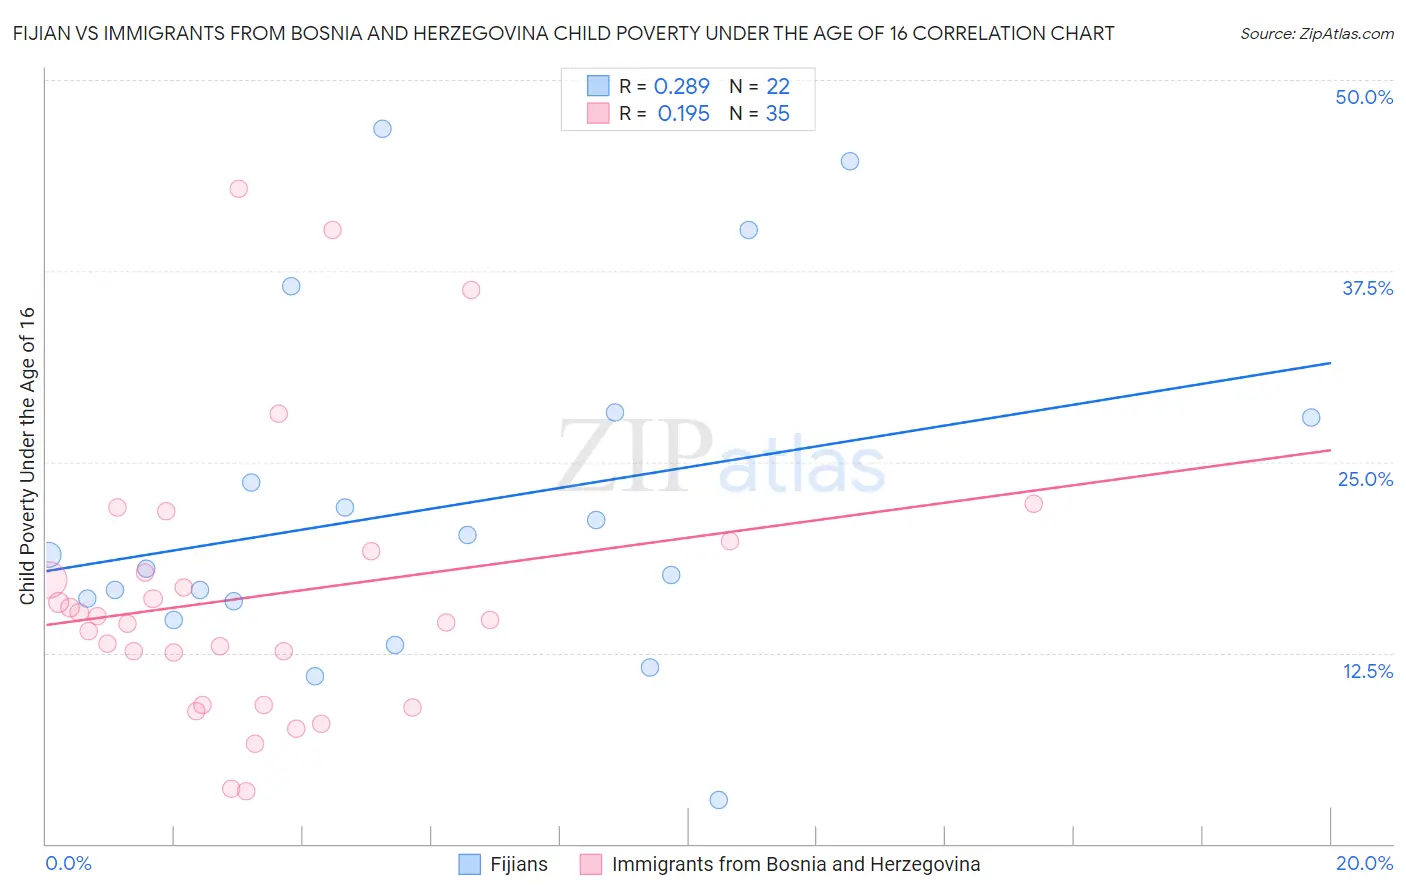 Fijian vs Immigrants from Bosnia and Herzegovina Child Poverty Under the Age of 16